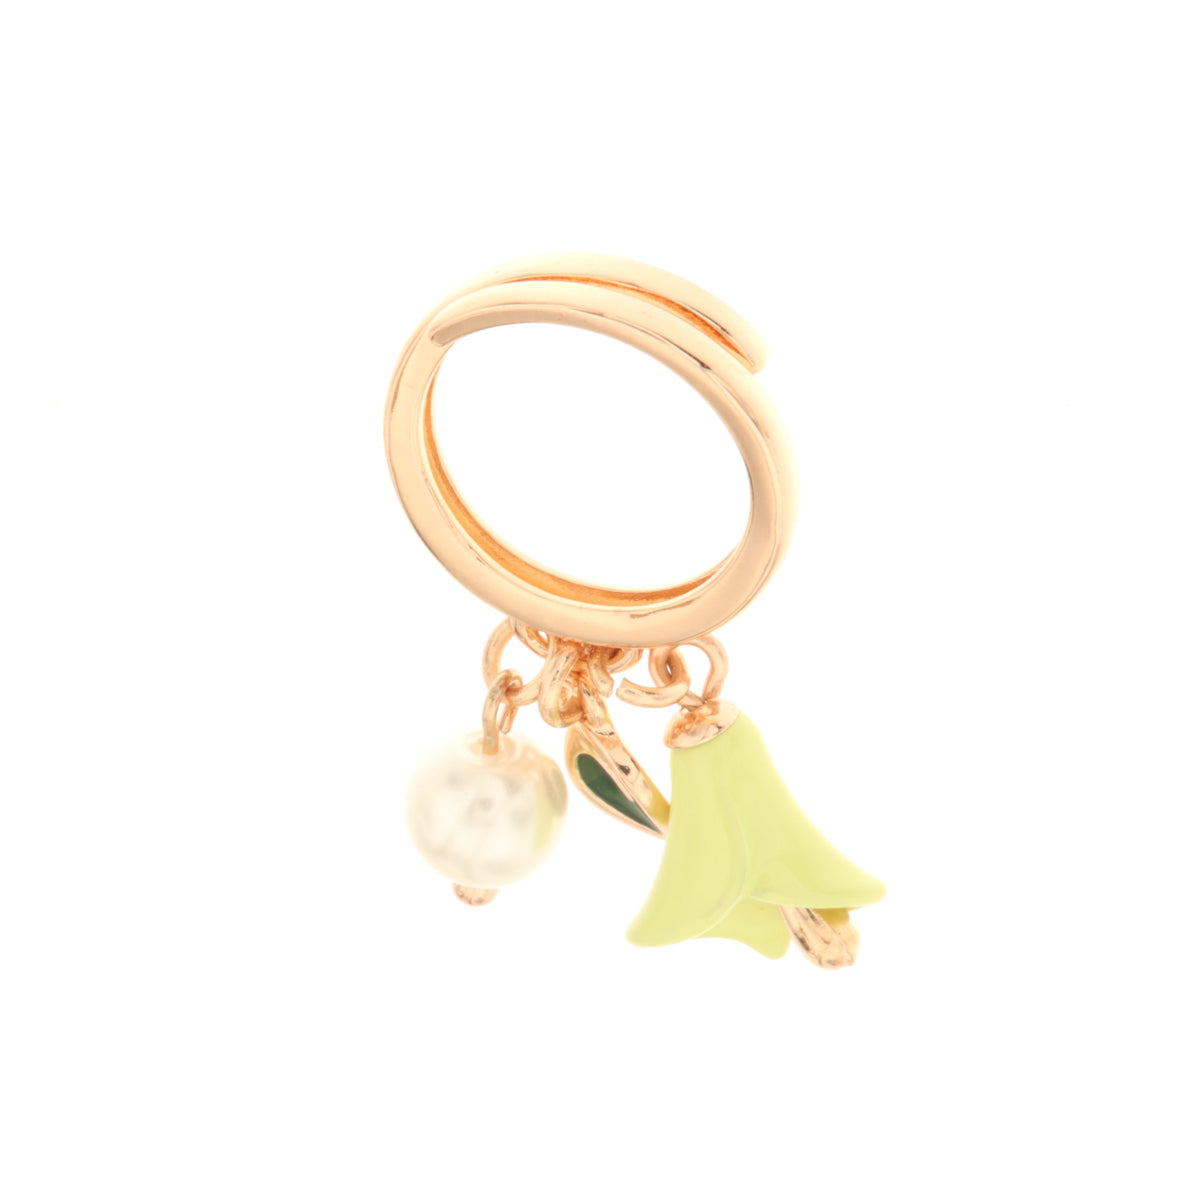 Metal ring with pearl and calla -shaped bell embellished with colored glazes